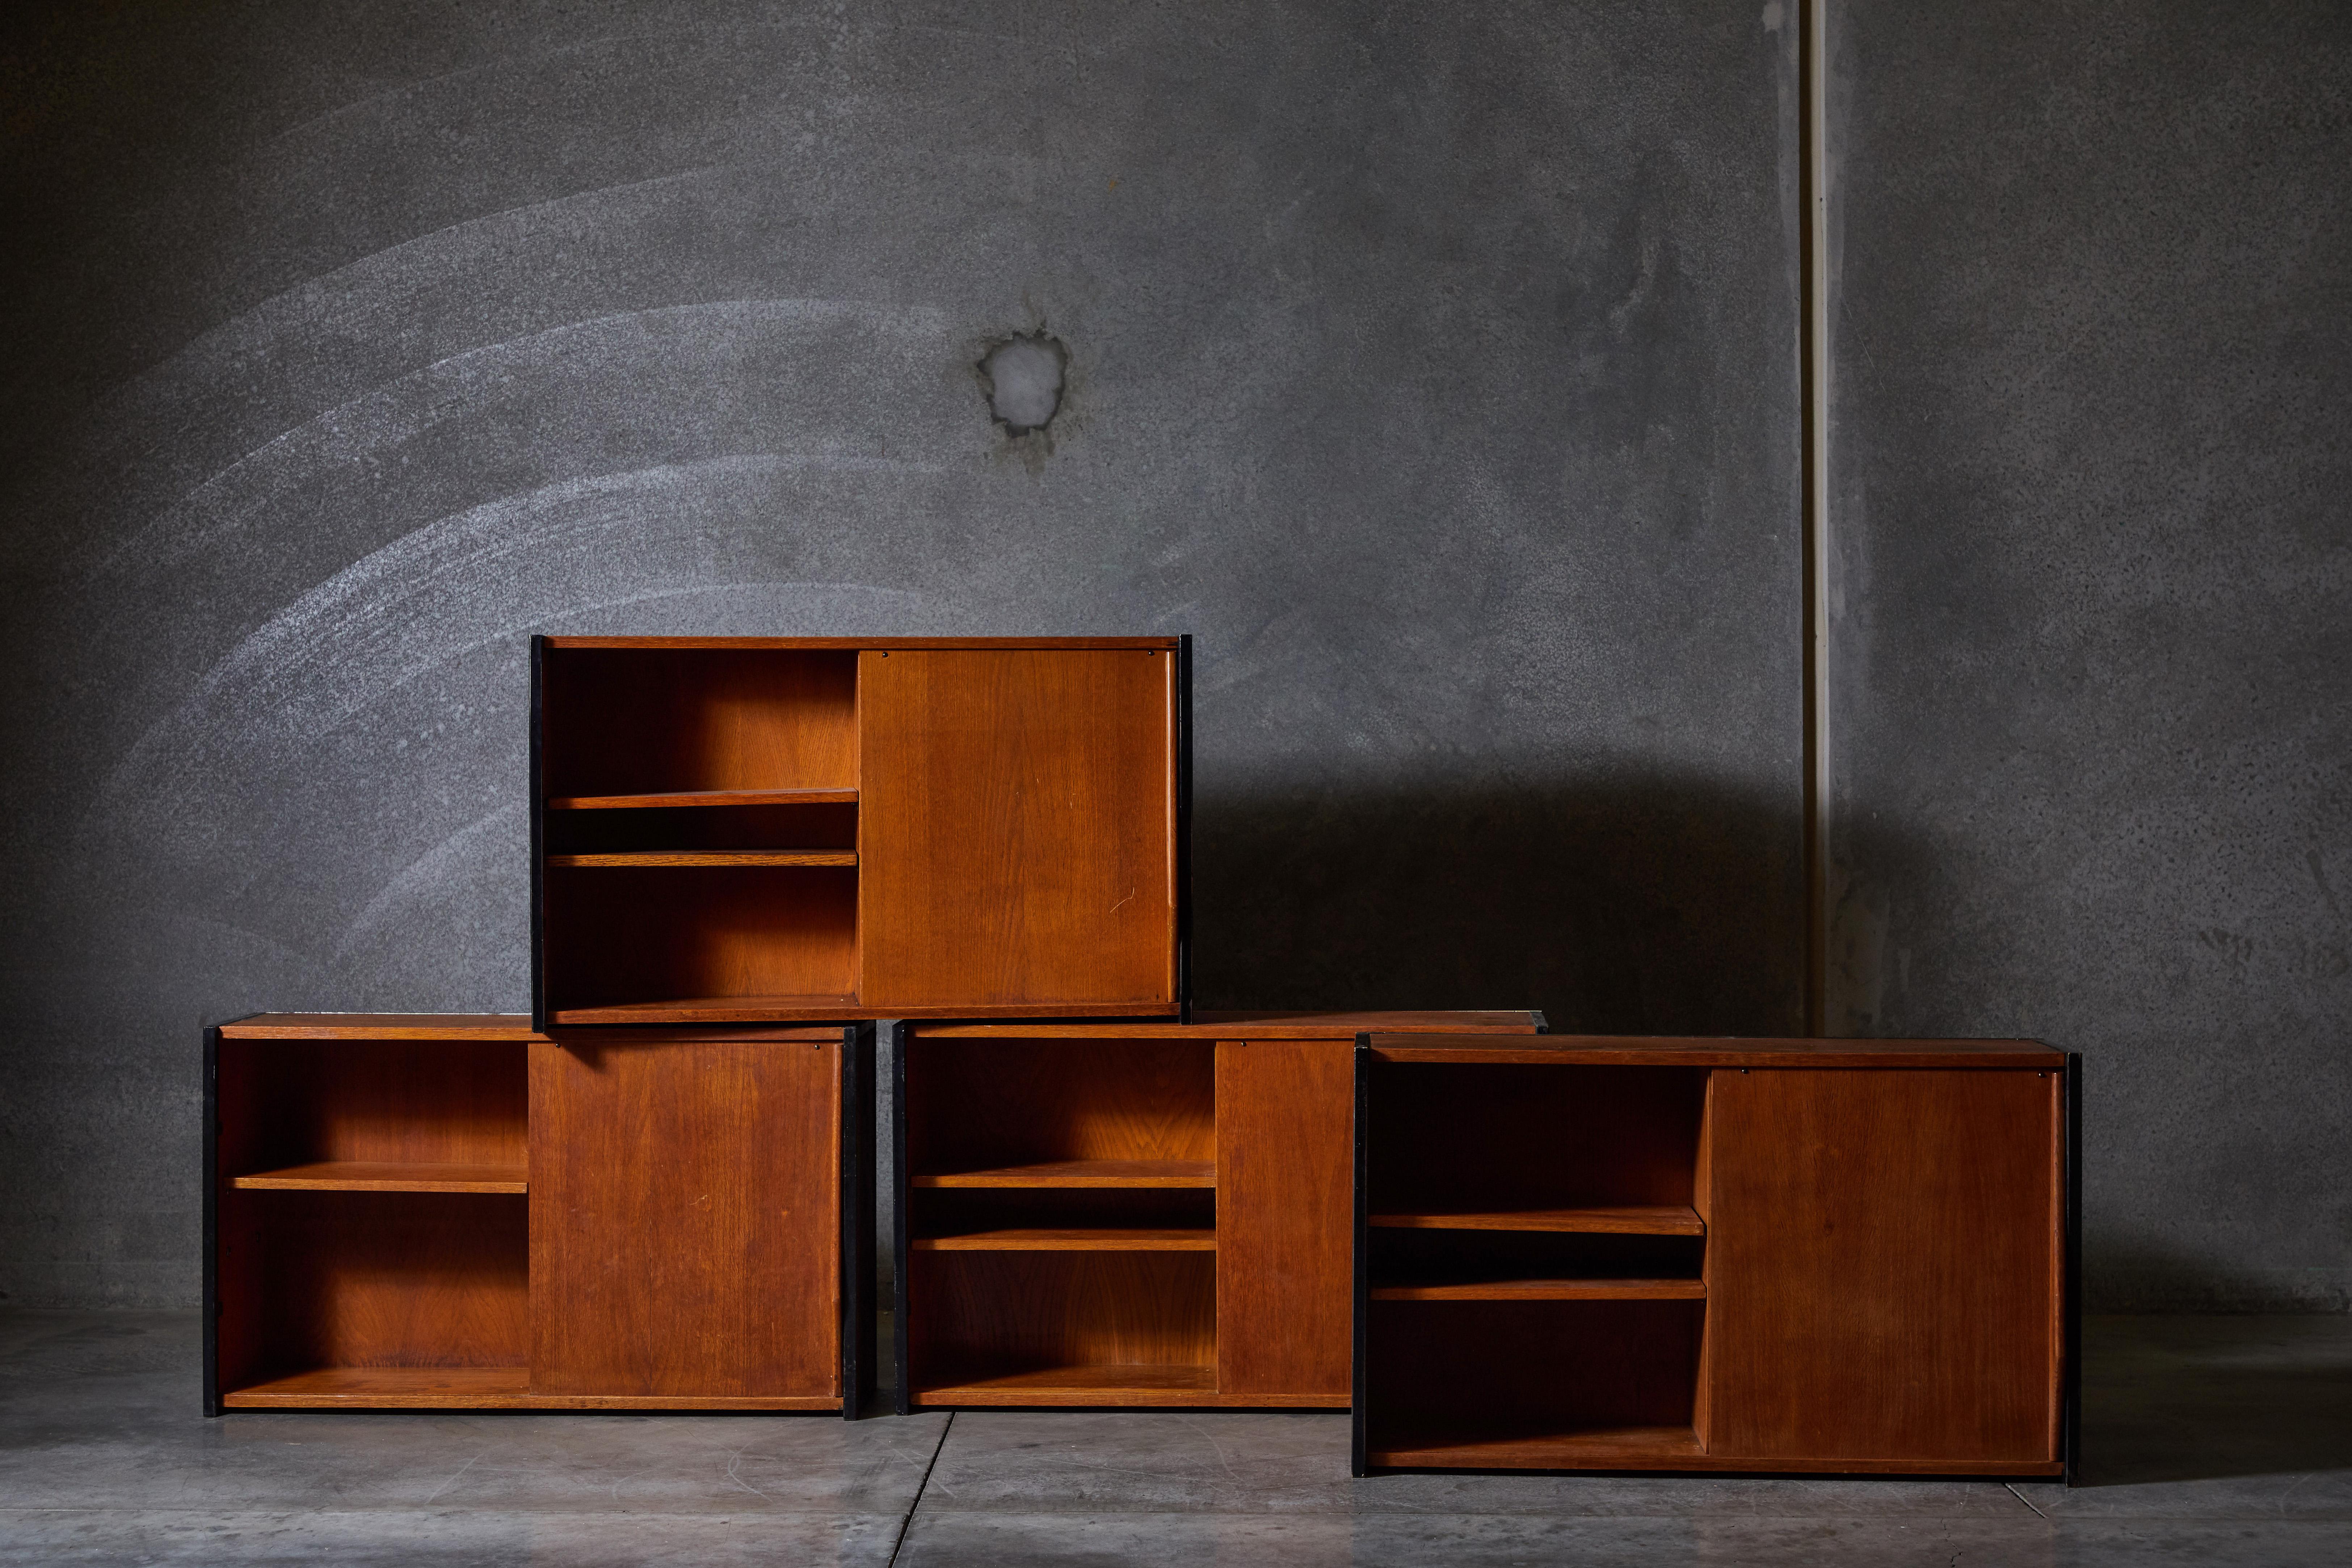 French wall mounted cabinets with single sliding door in the style of Charlotte Perriand. Made in France, circa 1950s.